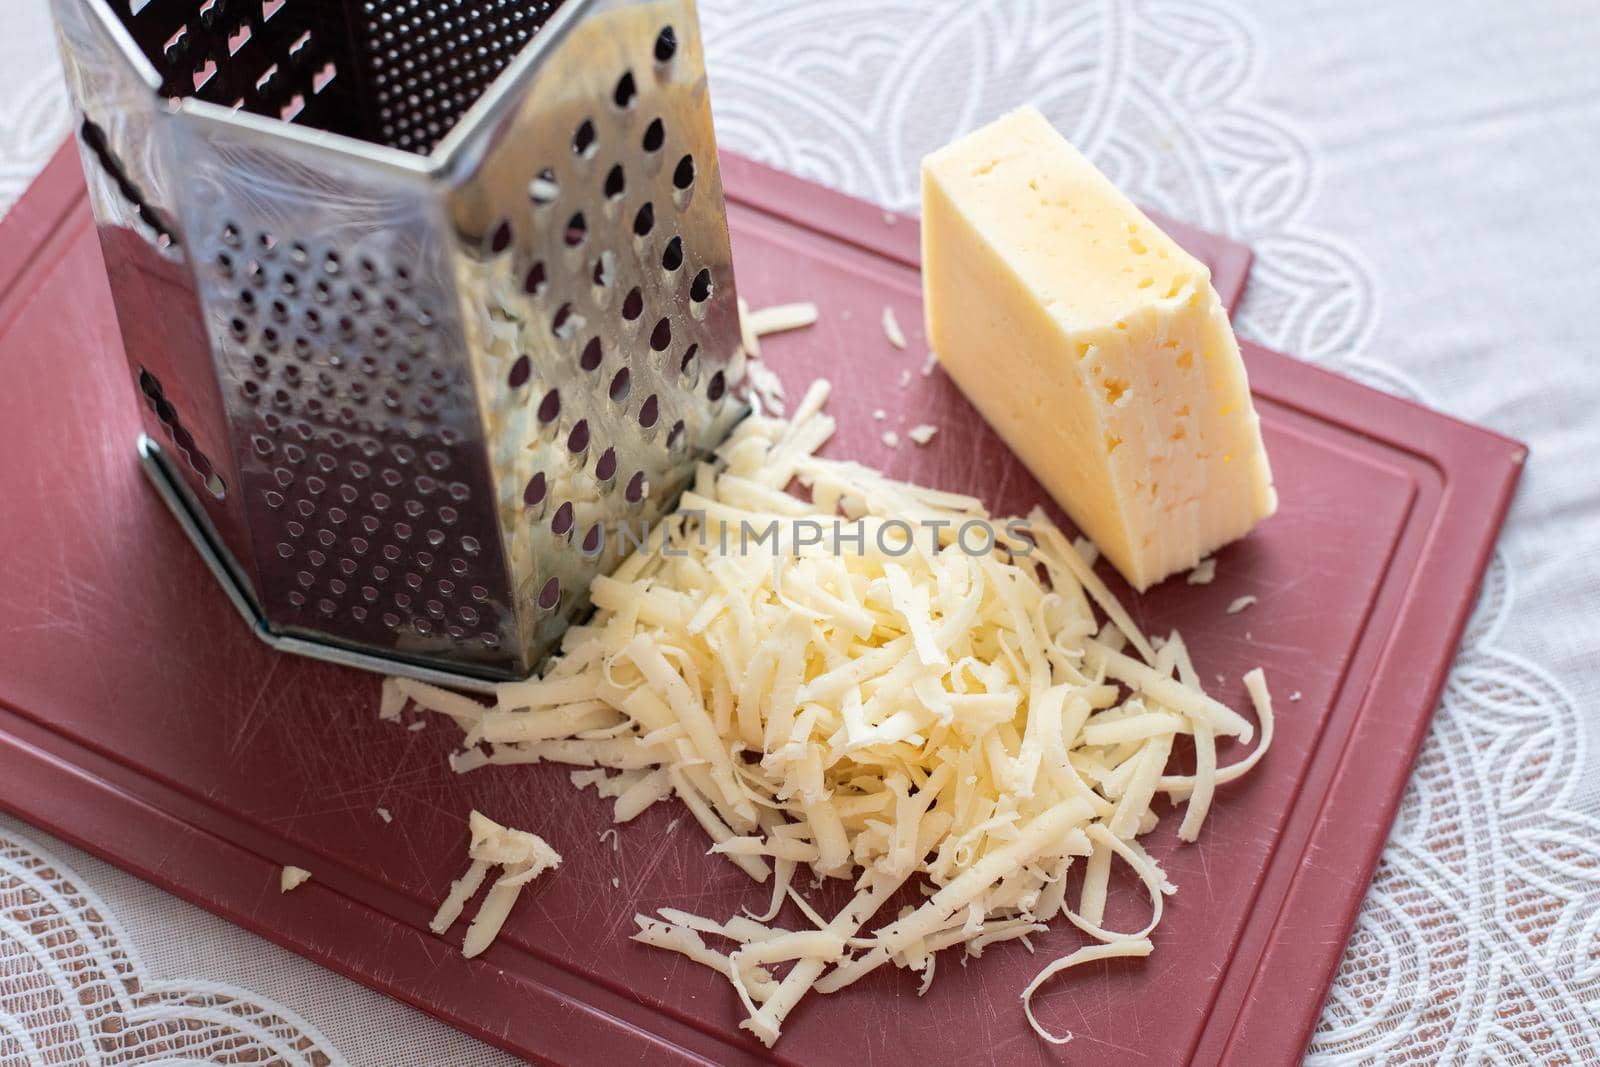 A pile of grated cheese on a plastic board next to a grater